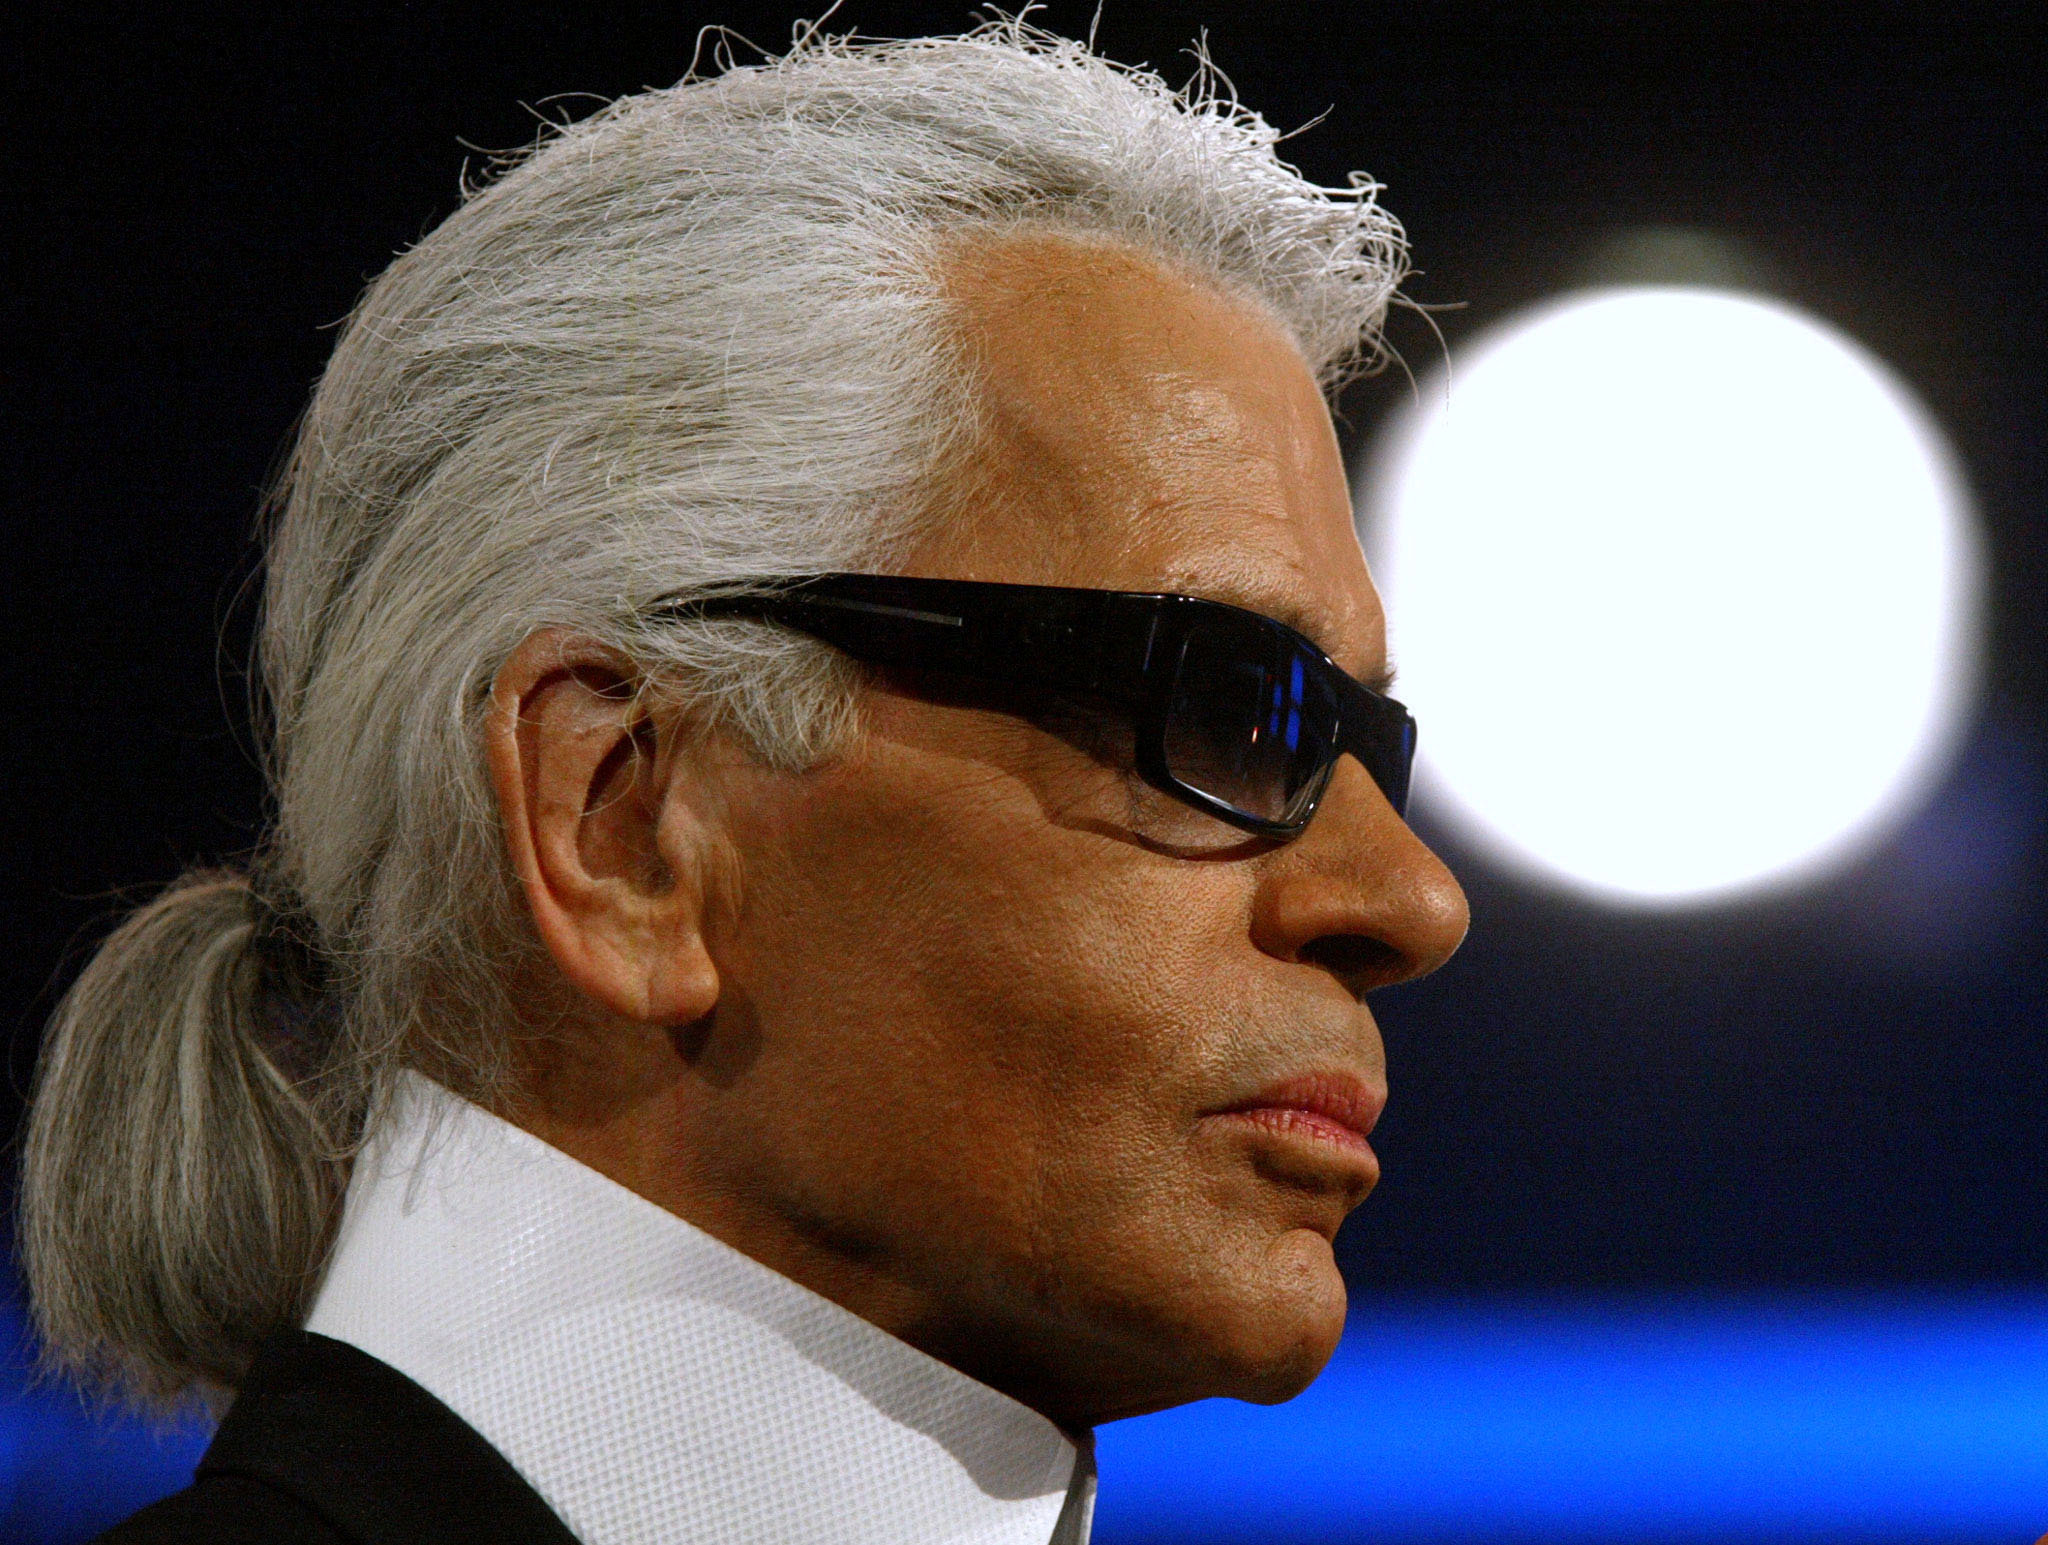 Karl Lagerfeld dead: From young genius to tragedy that sparked